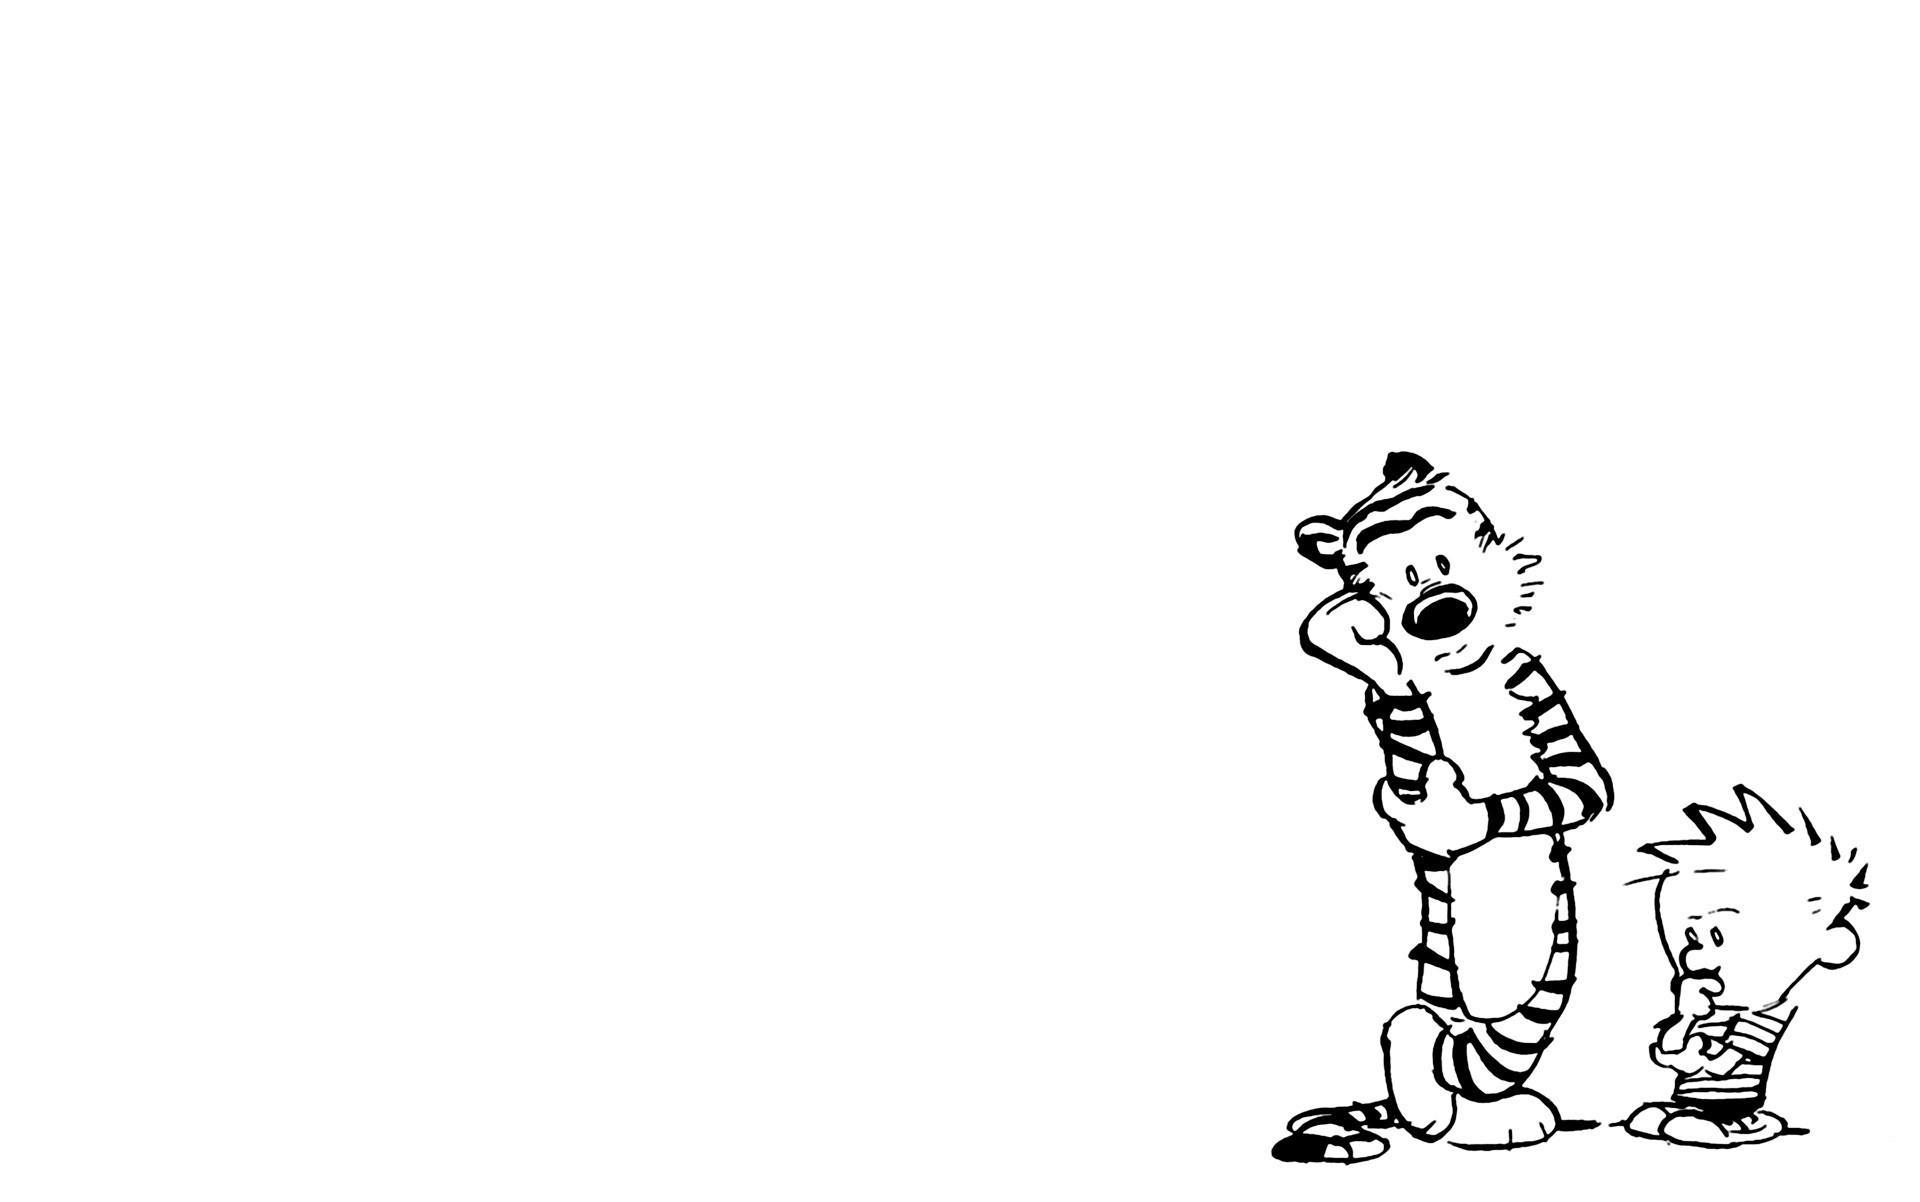 Calvin and Hobbes Wallpaper Black and White